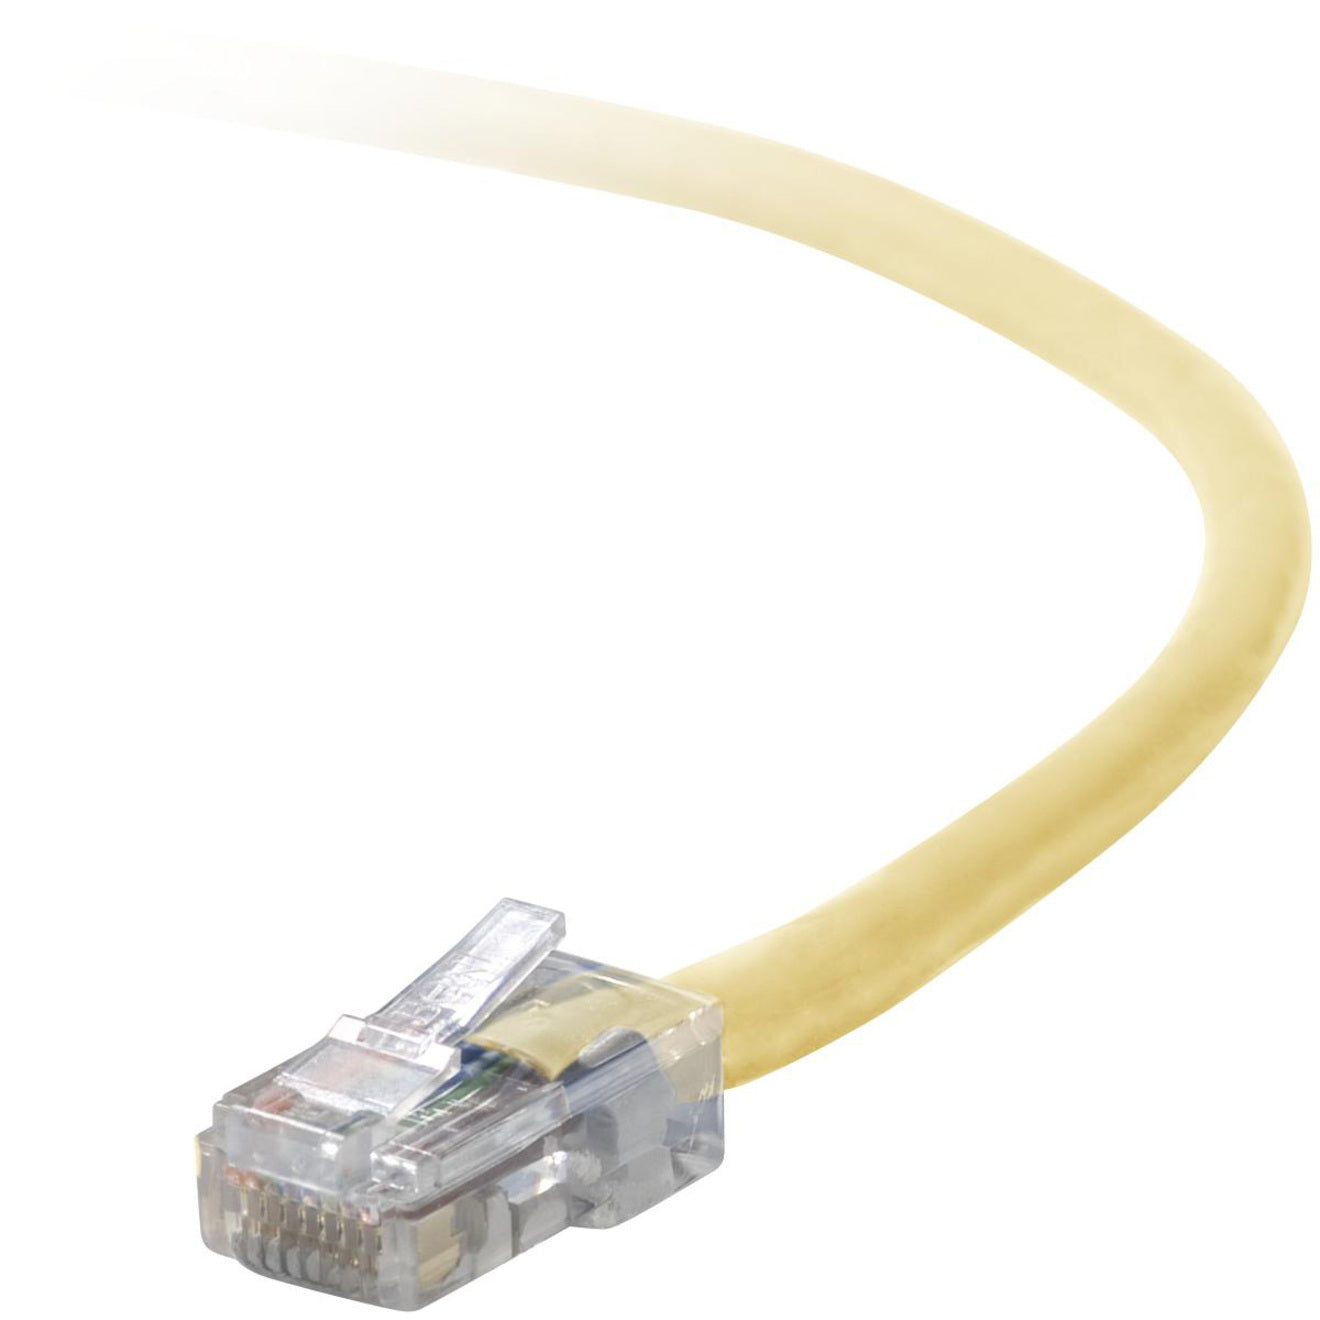 Belkin A3L791-12-YLW RJ45 Category 5e Patch Cable, 12 ft, Copper Conductor, Yellow